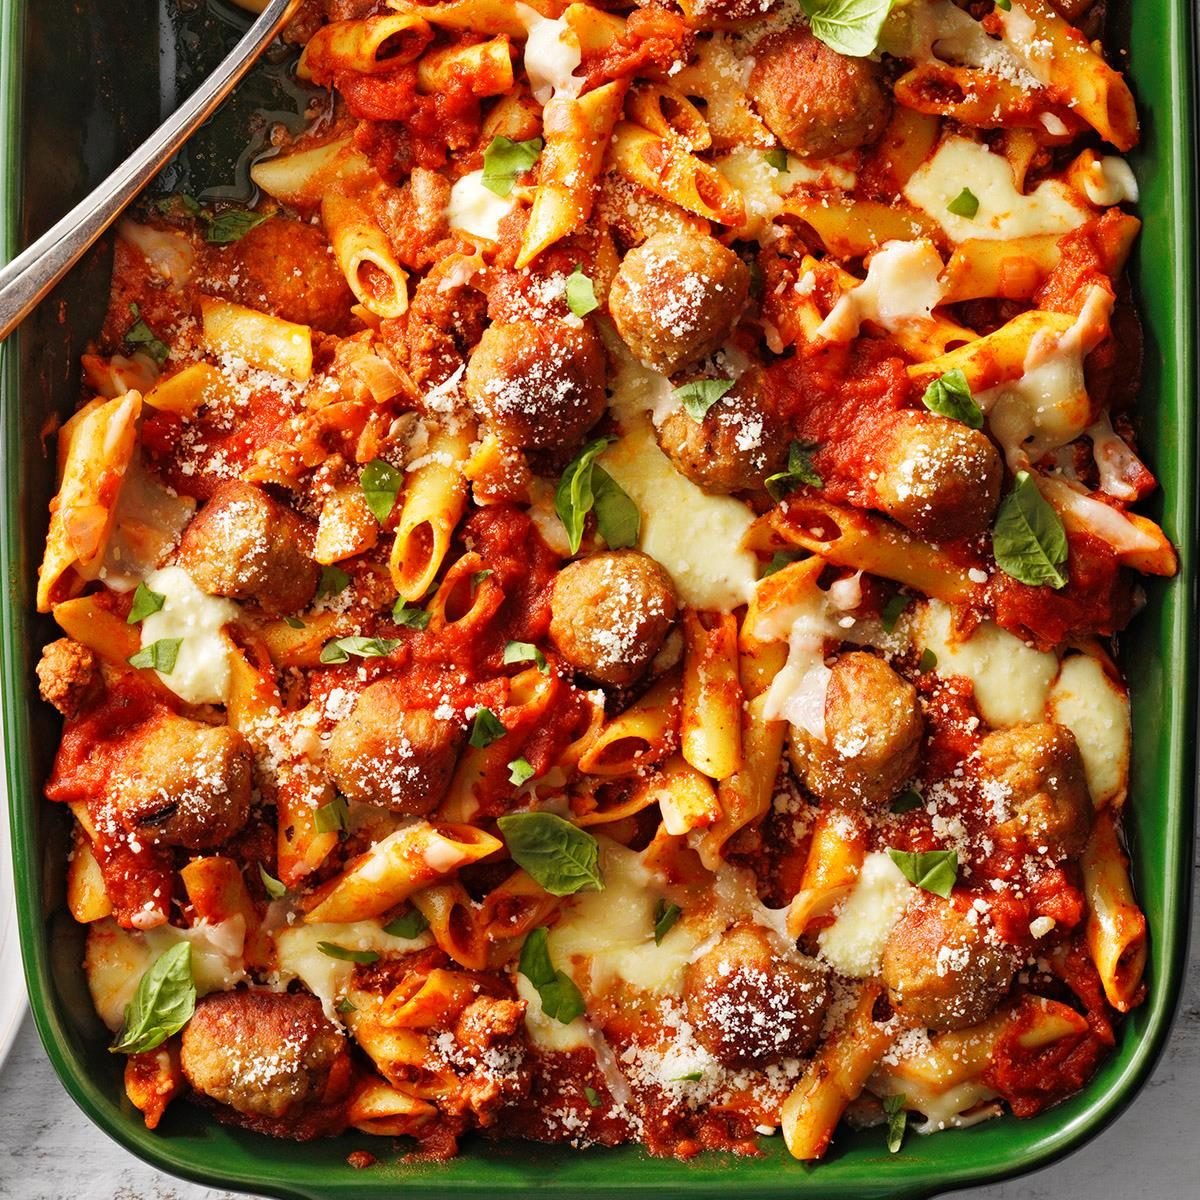 60 Easy Weeknight Dinners That Make Perfect Family Meals